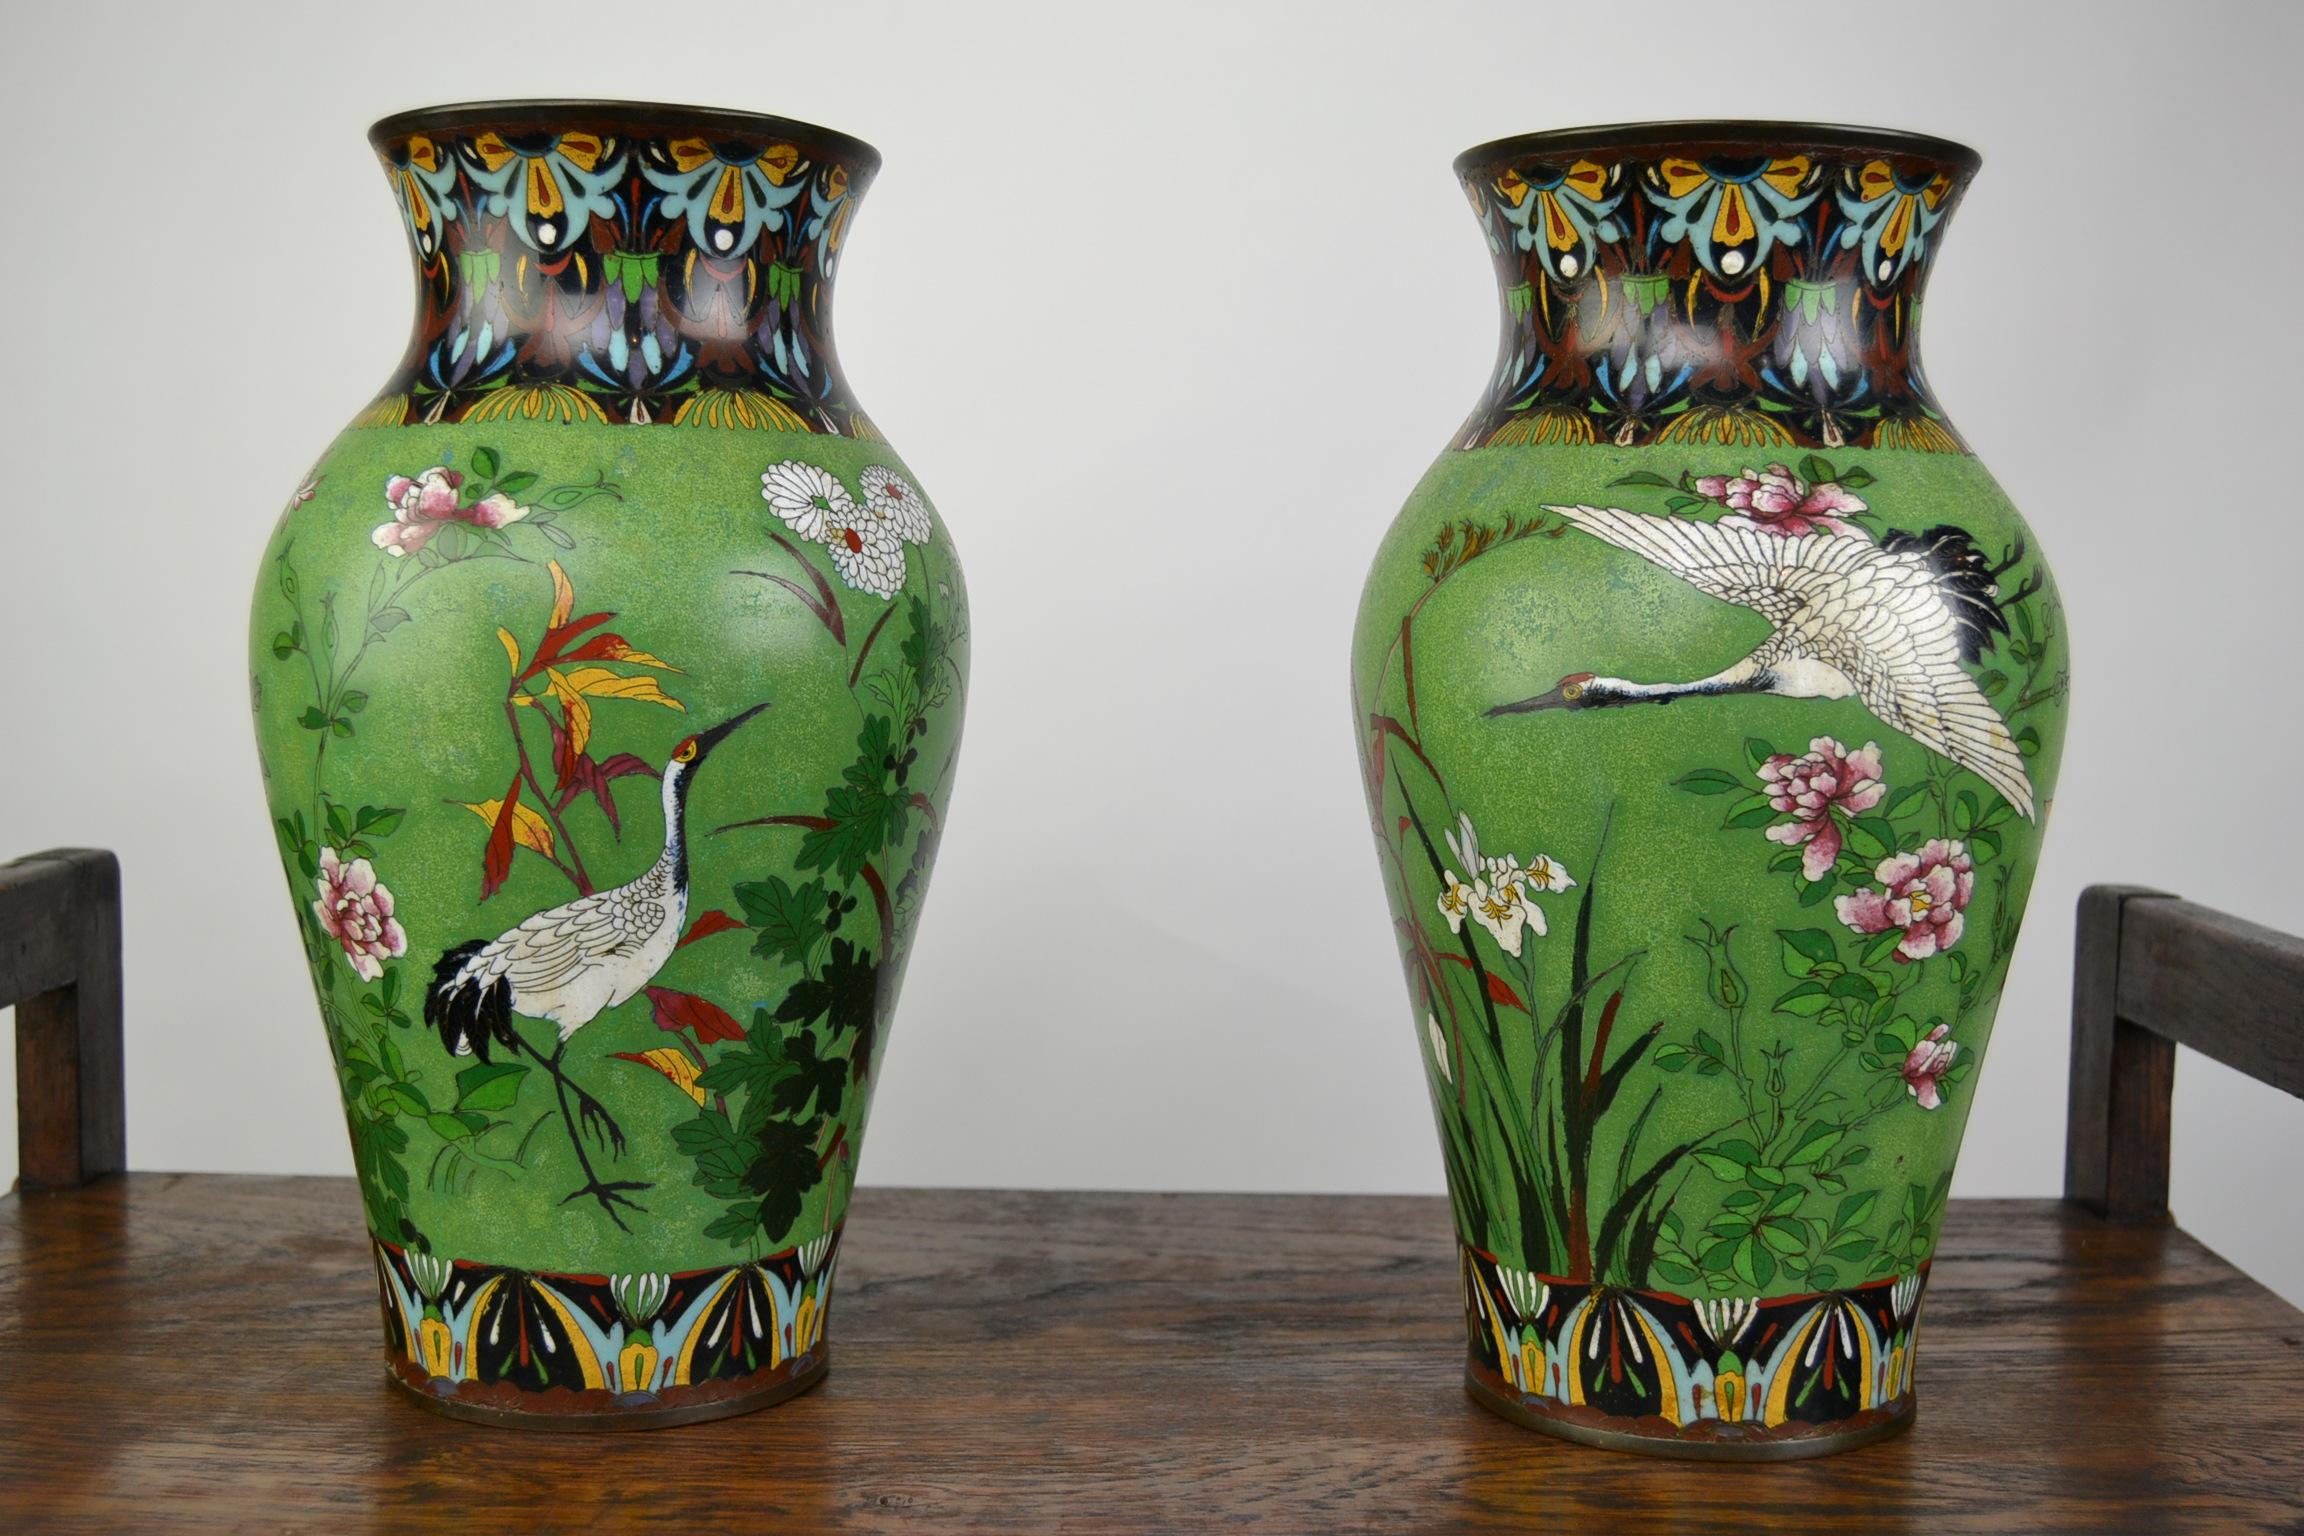 Pair of Japanese Cloisonne Enamel on Copper Vases with Crane Birds and Flowers  5